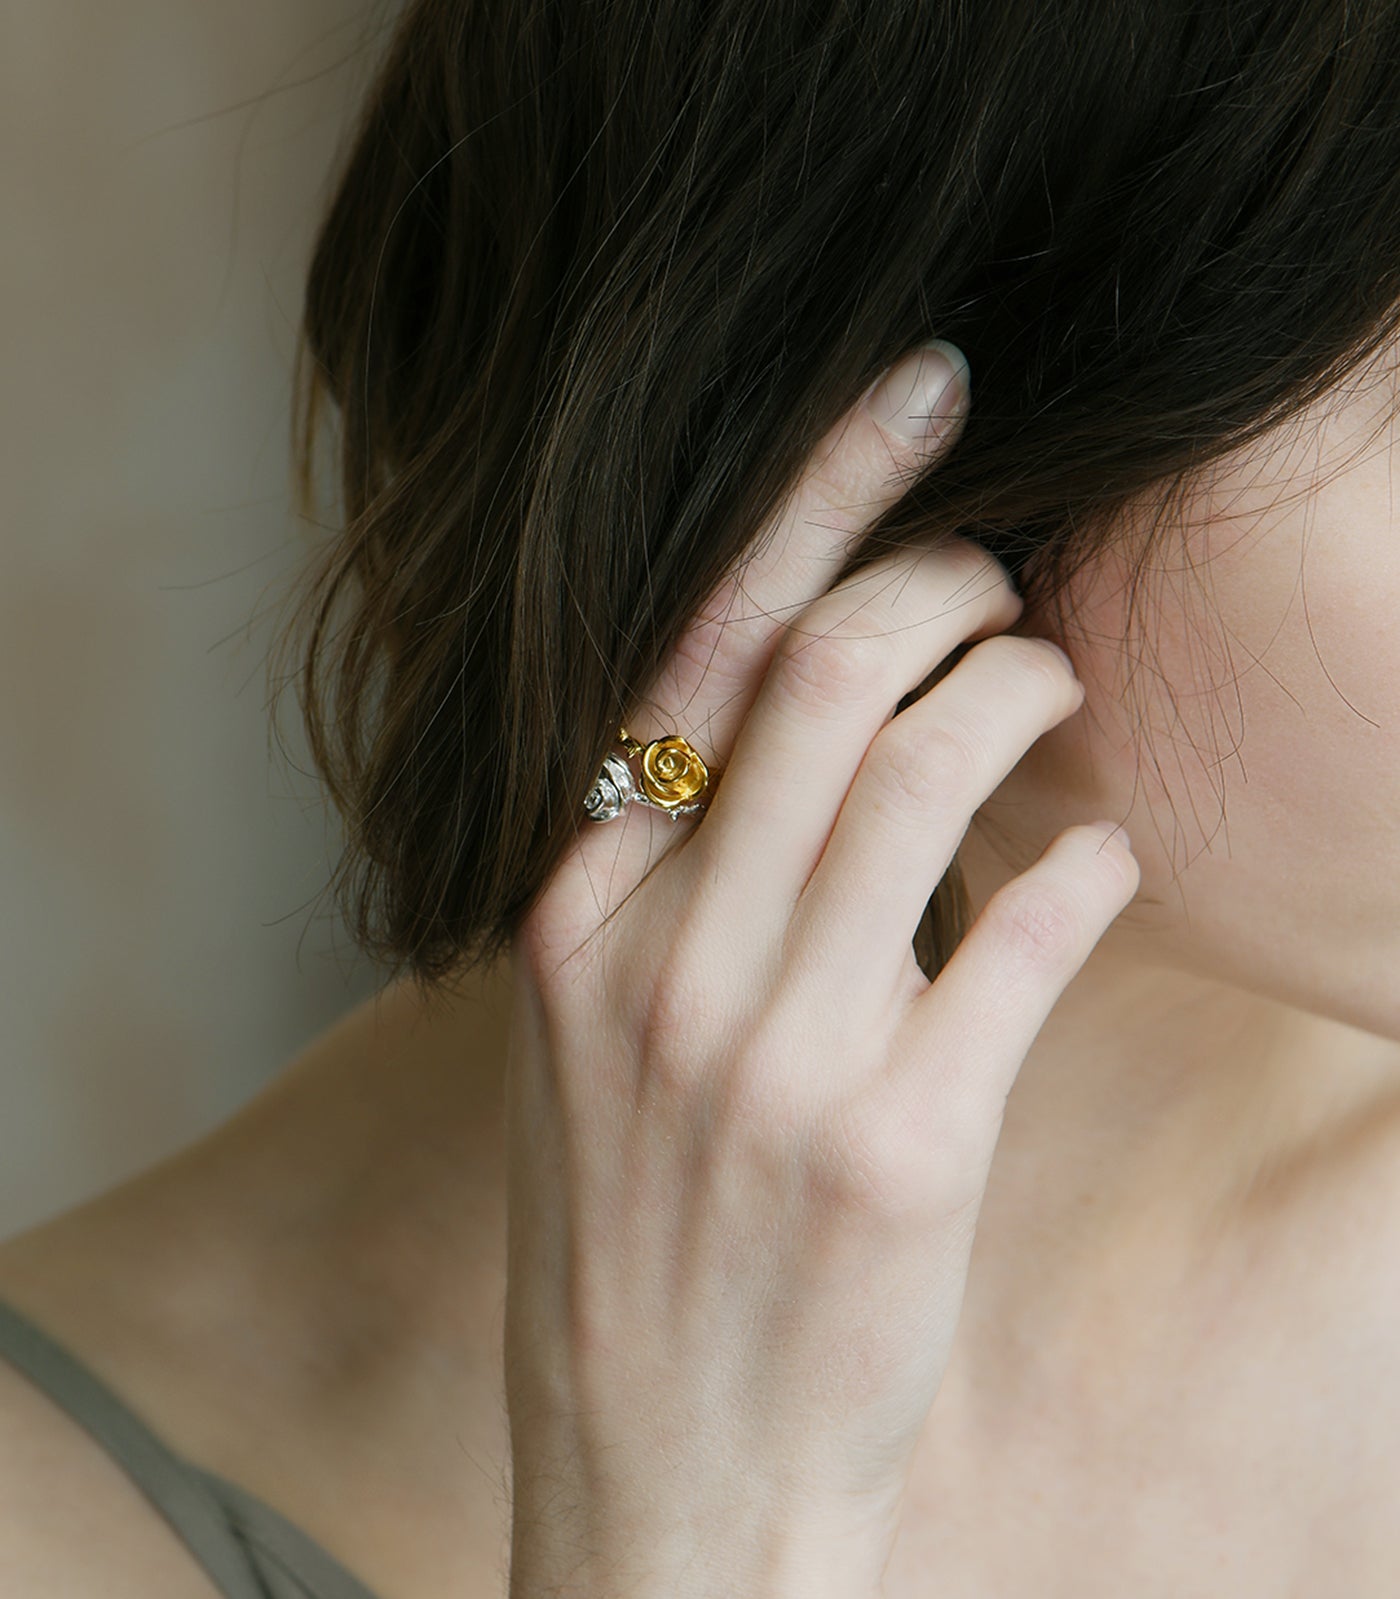 A model wears a gold vermeil ring with a thorn detailing on the band and a rose design on the top of the ring.